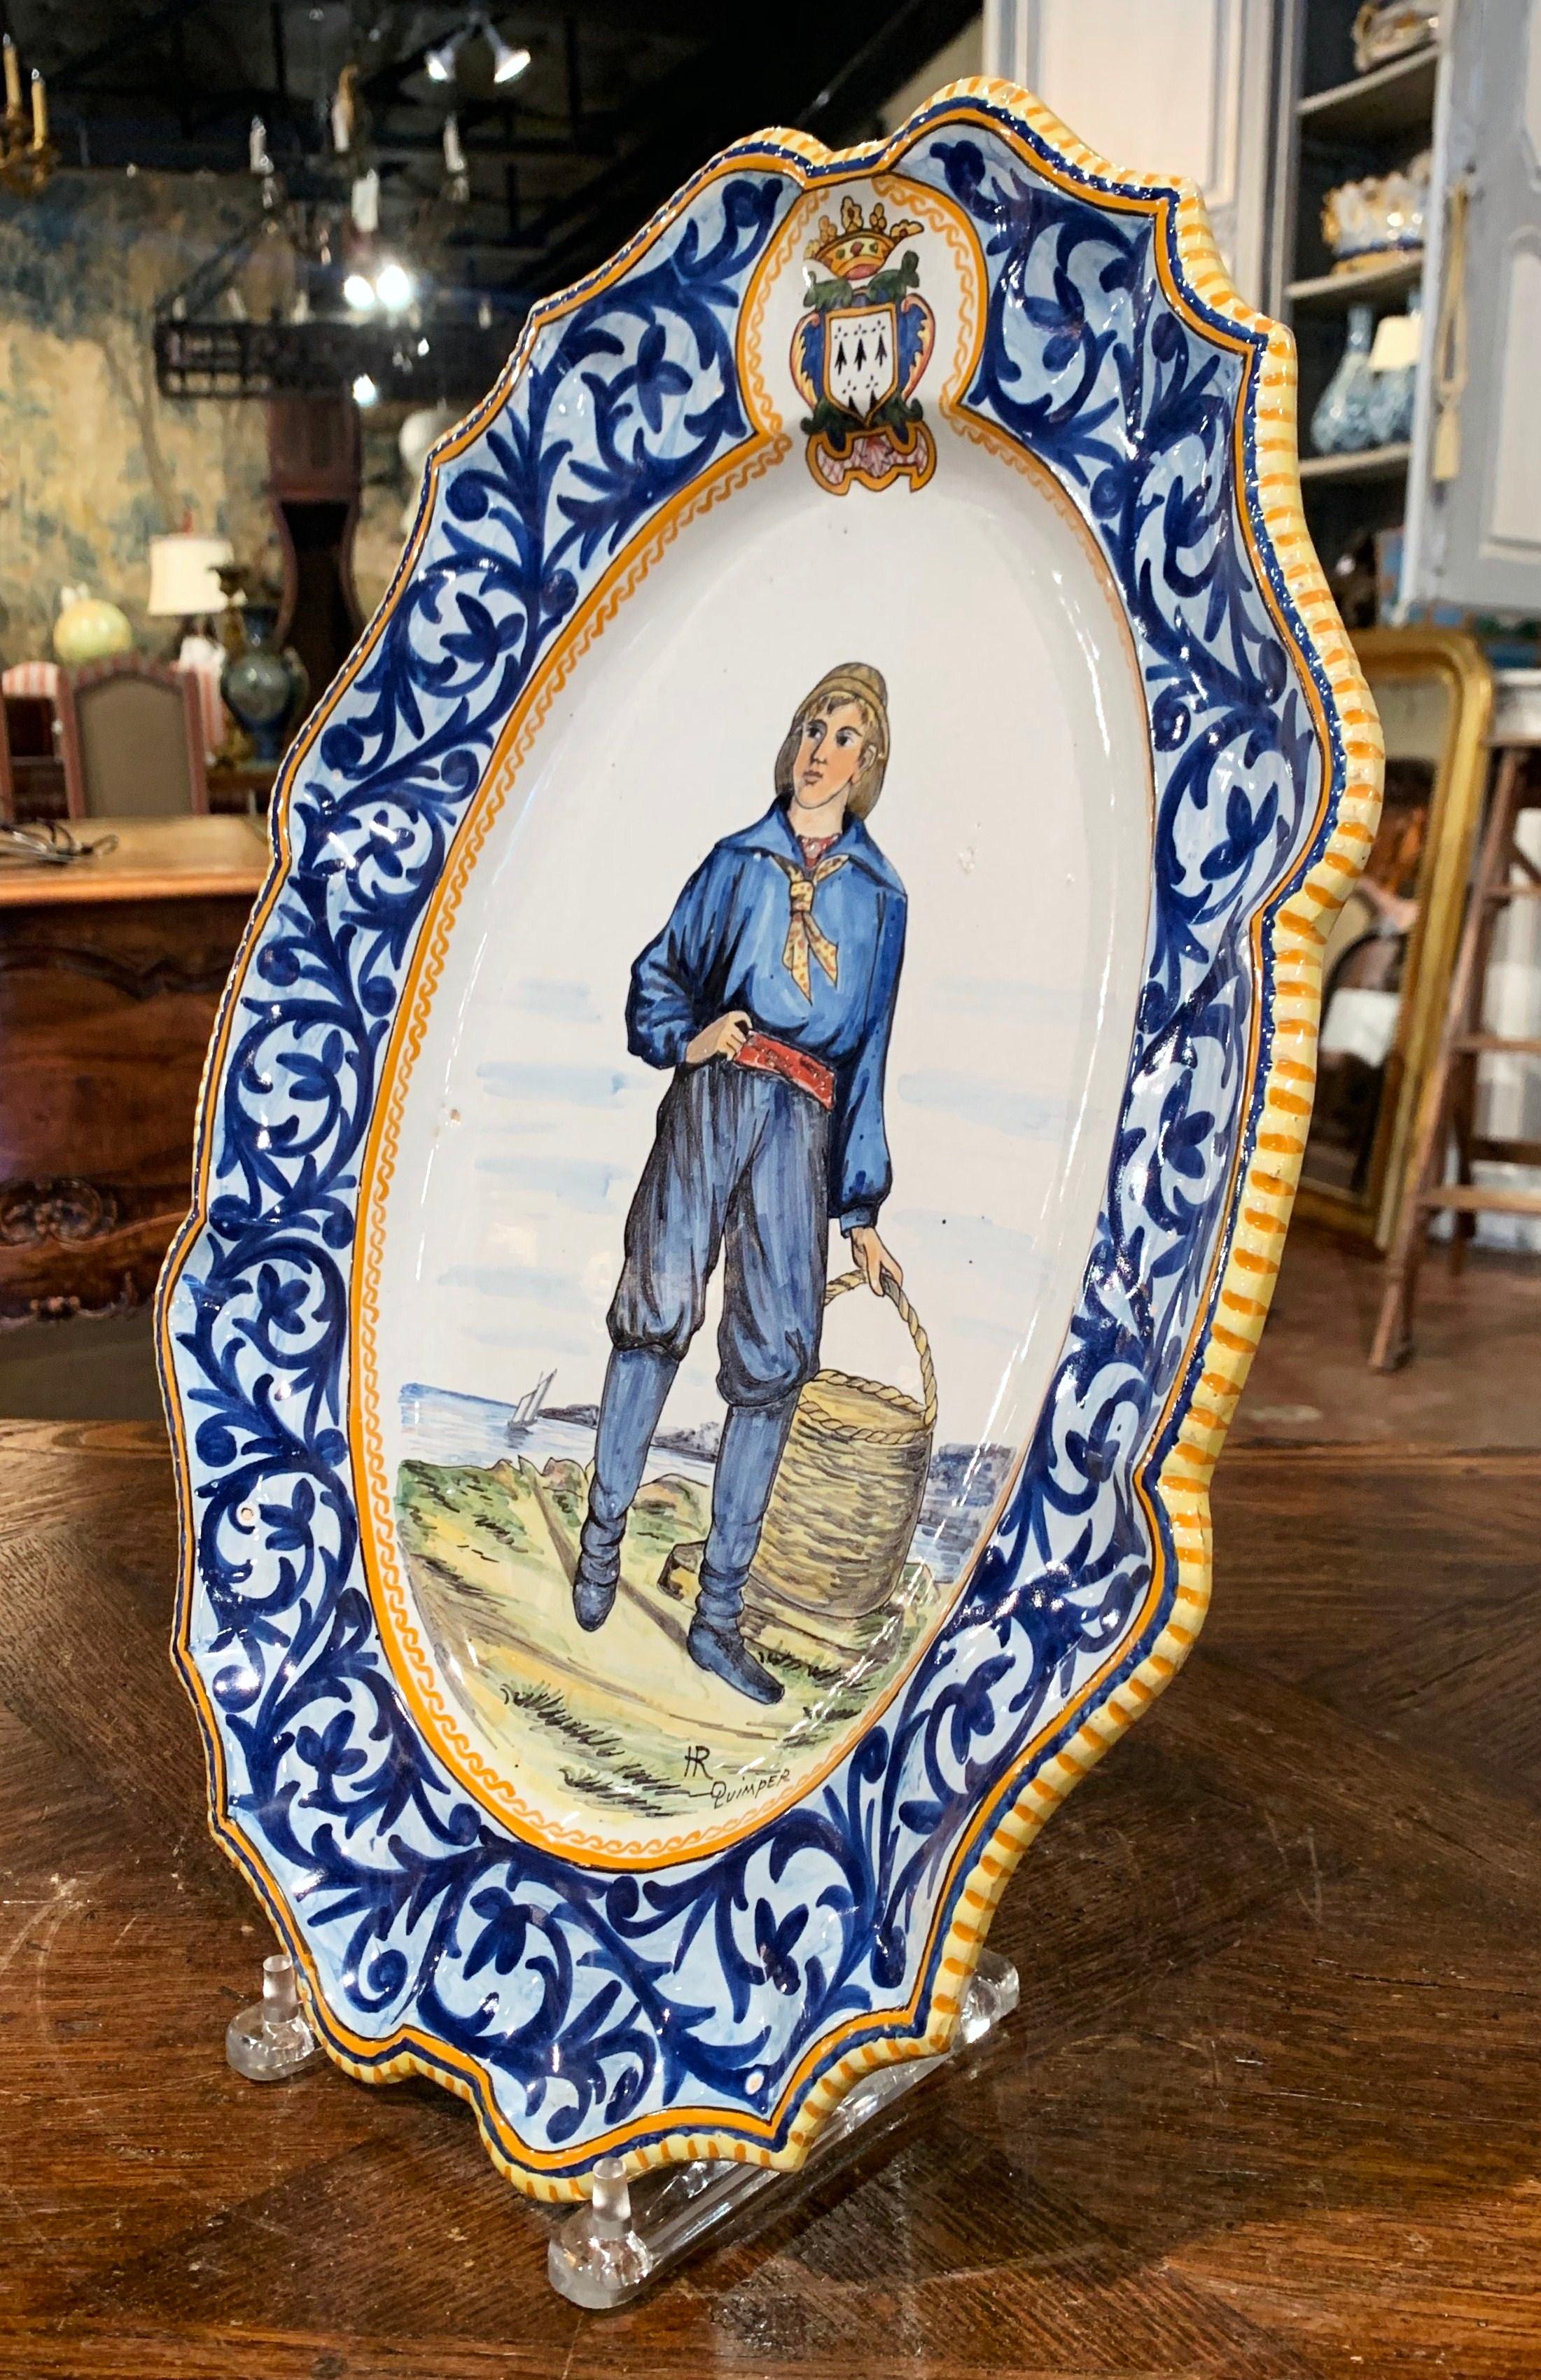 Decorate a wall or a shelf with this large antique platter. Created in Brittany, France circa 1895, the hand painted ceramic plate depicts a Breton traditional costumes and going mussel fishing. The oval, porcelain platter is decorated with a blue